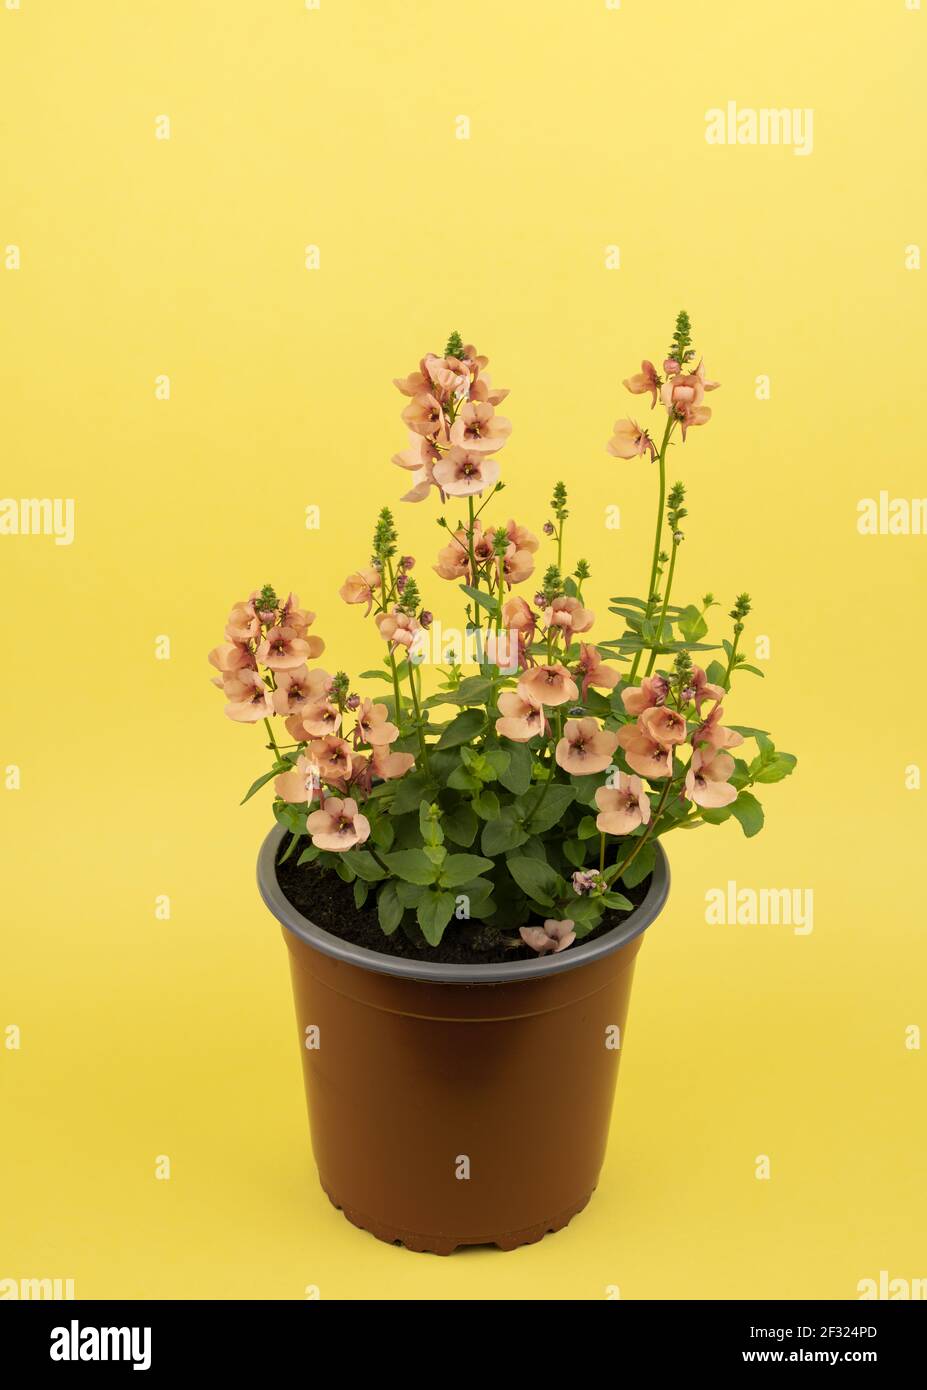 diascia rigescens in pot with yellow background, top view Stock Photo